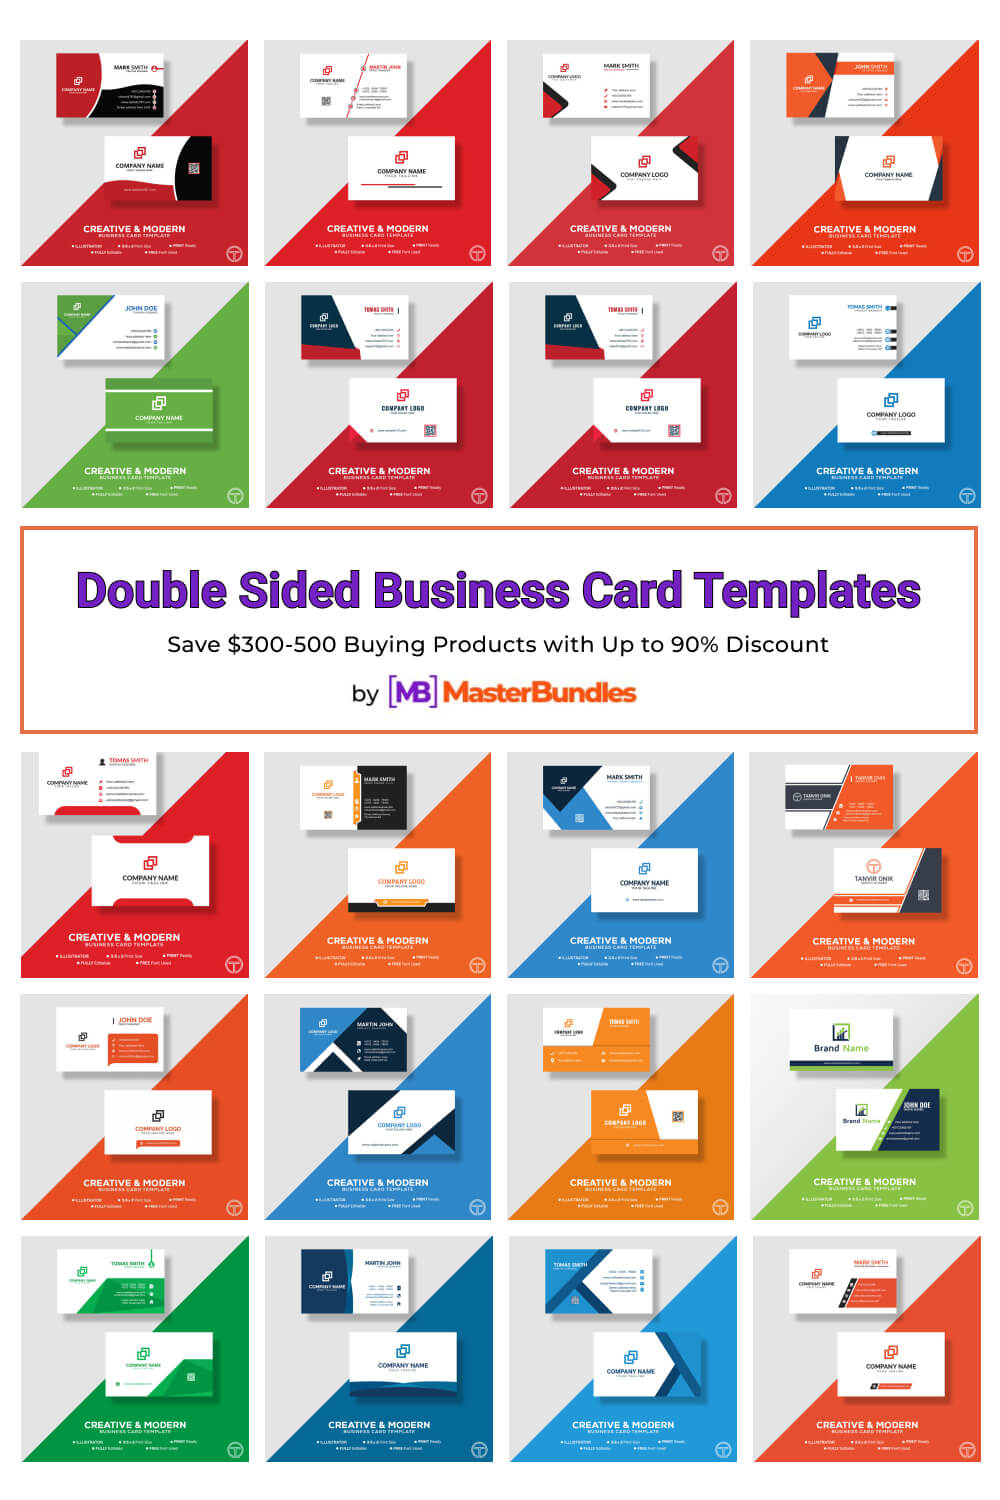 double sided business card templates pinterest image.